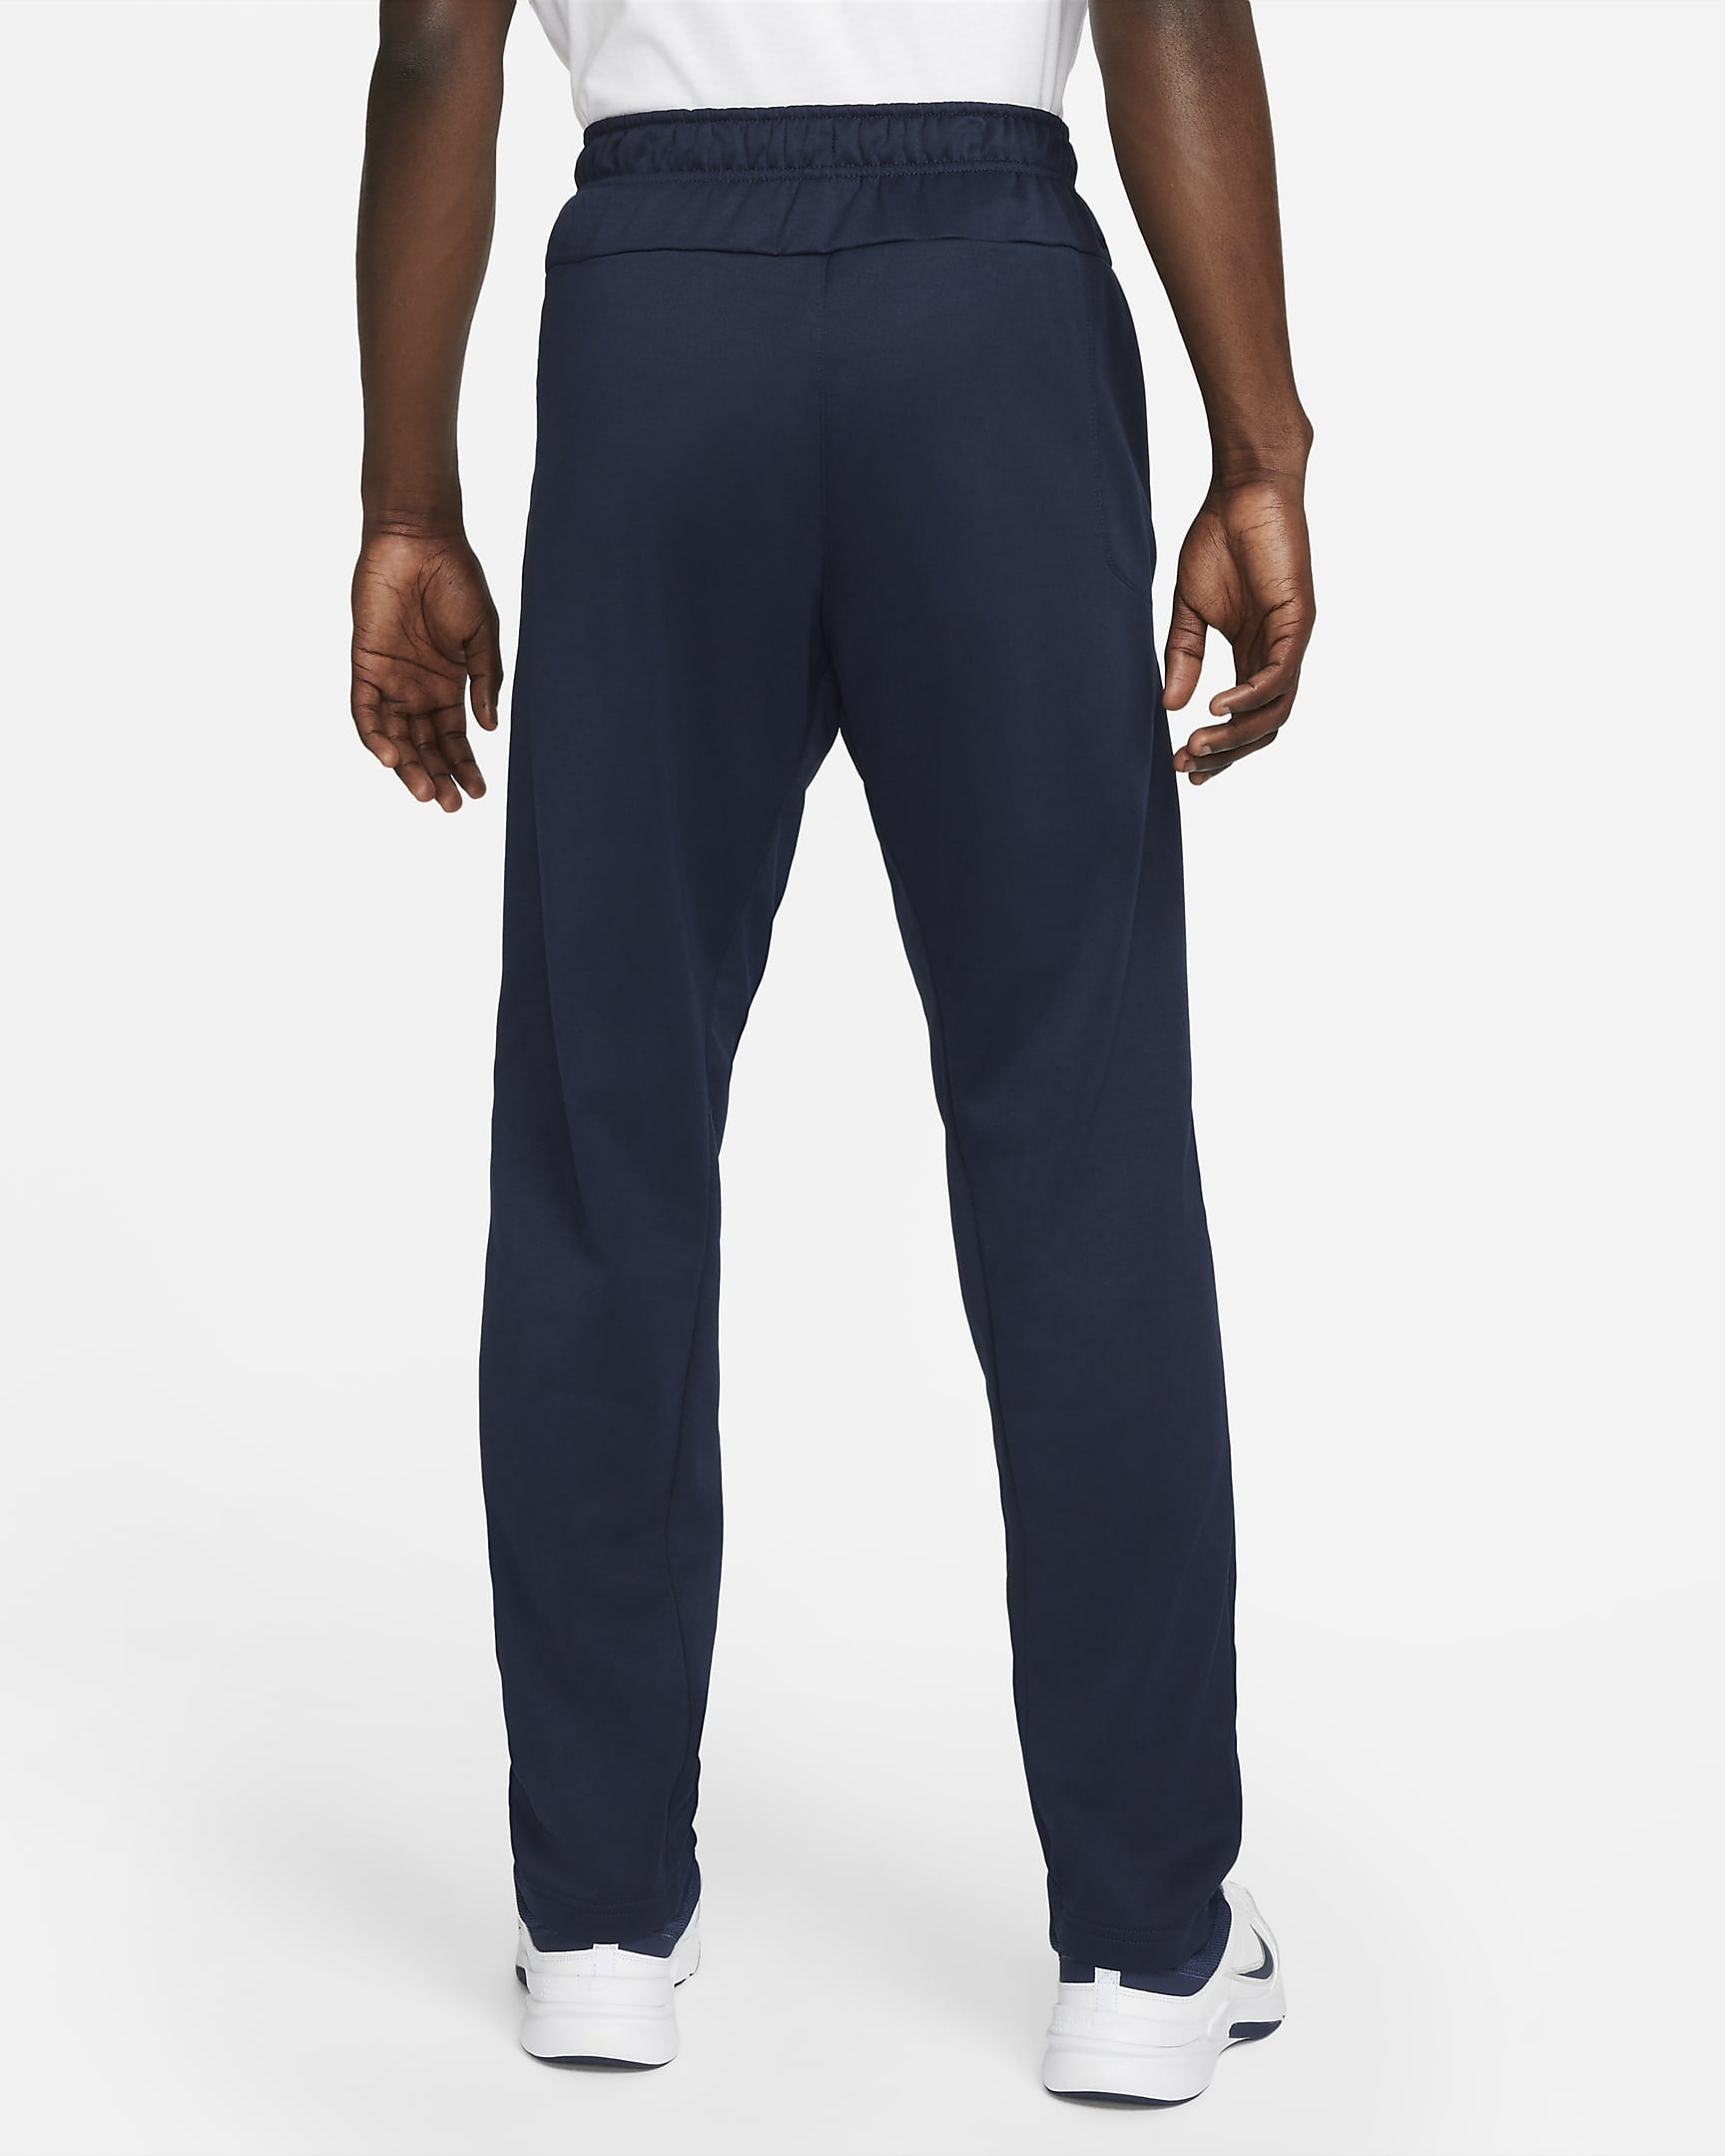 MENS THERMA OPEN HEM PANT - DQ4856 – The Sports Center